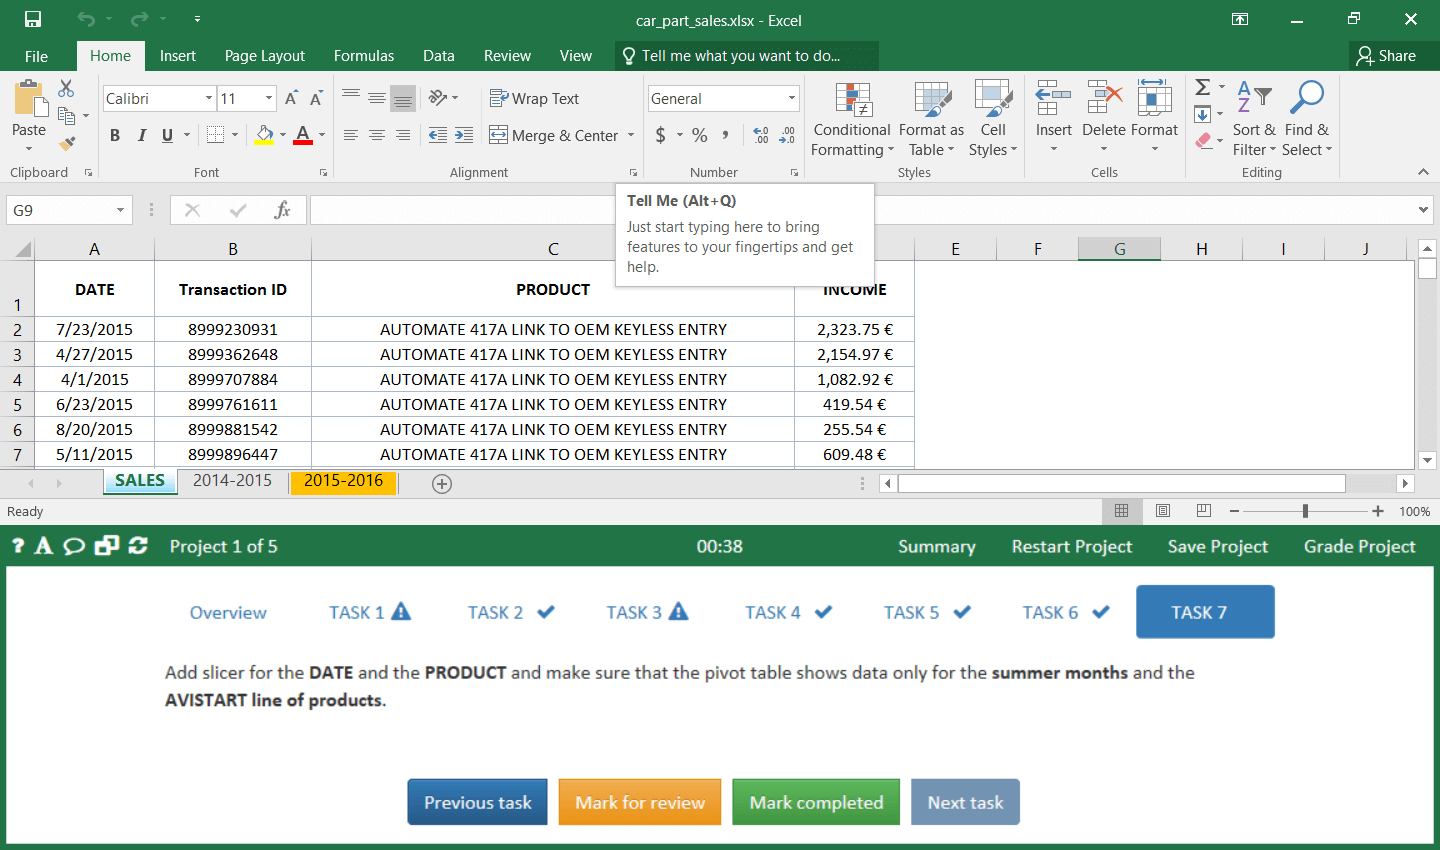 MOS 2016 Study Guide for Microsoft Excel Expert